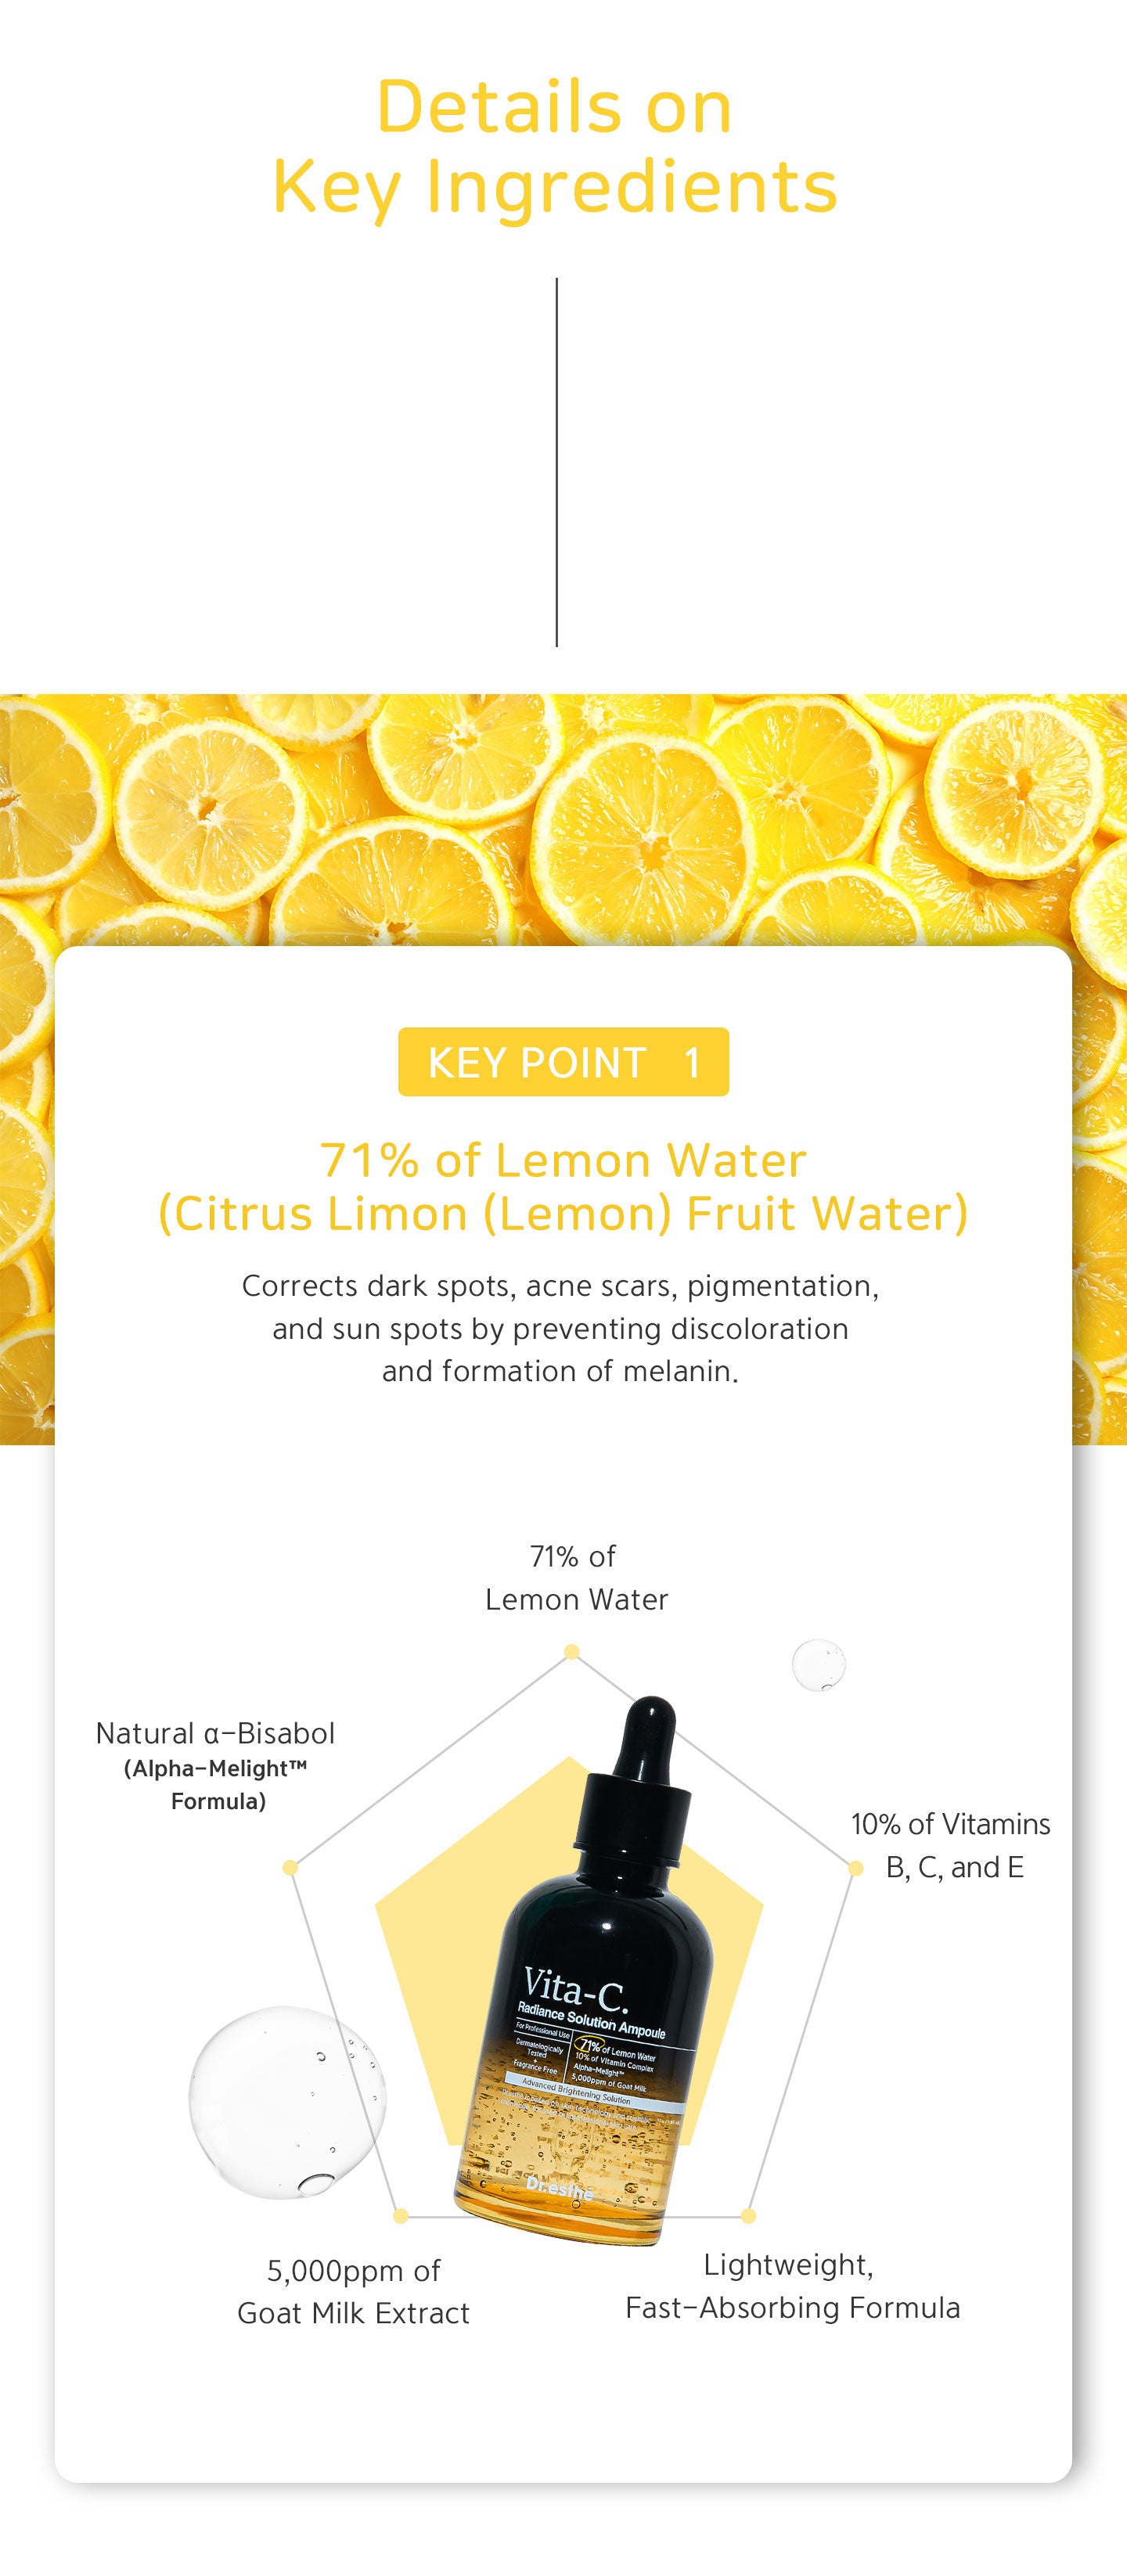 71% of lemon water corrects dark spots, acne scars, pigmentation, and sun spots by preventing discolouration and formation of melanin. 10% of vitamins B, C and E. 5000 ppm of goat milk extract. Lightweight, fast-absorbing formula. 